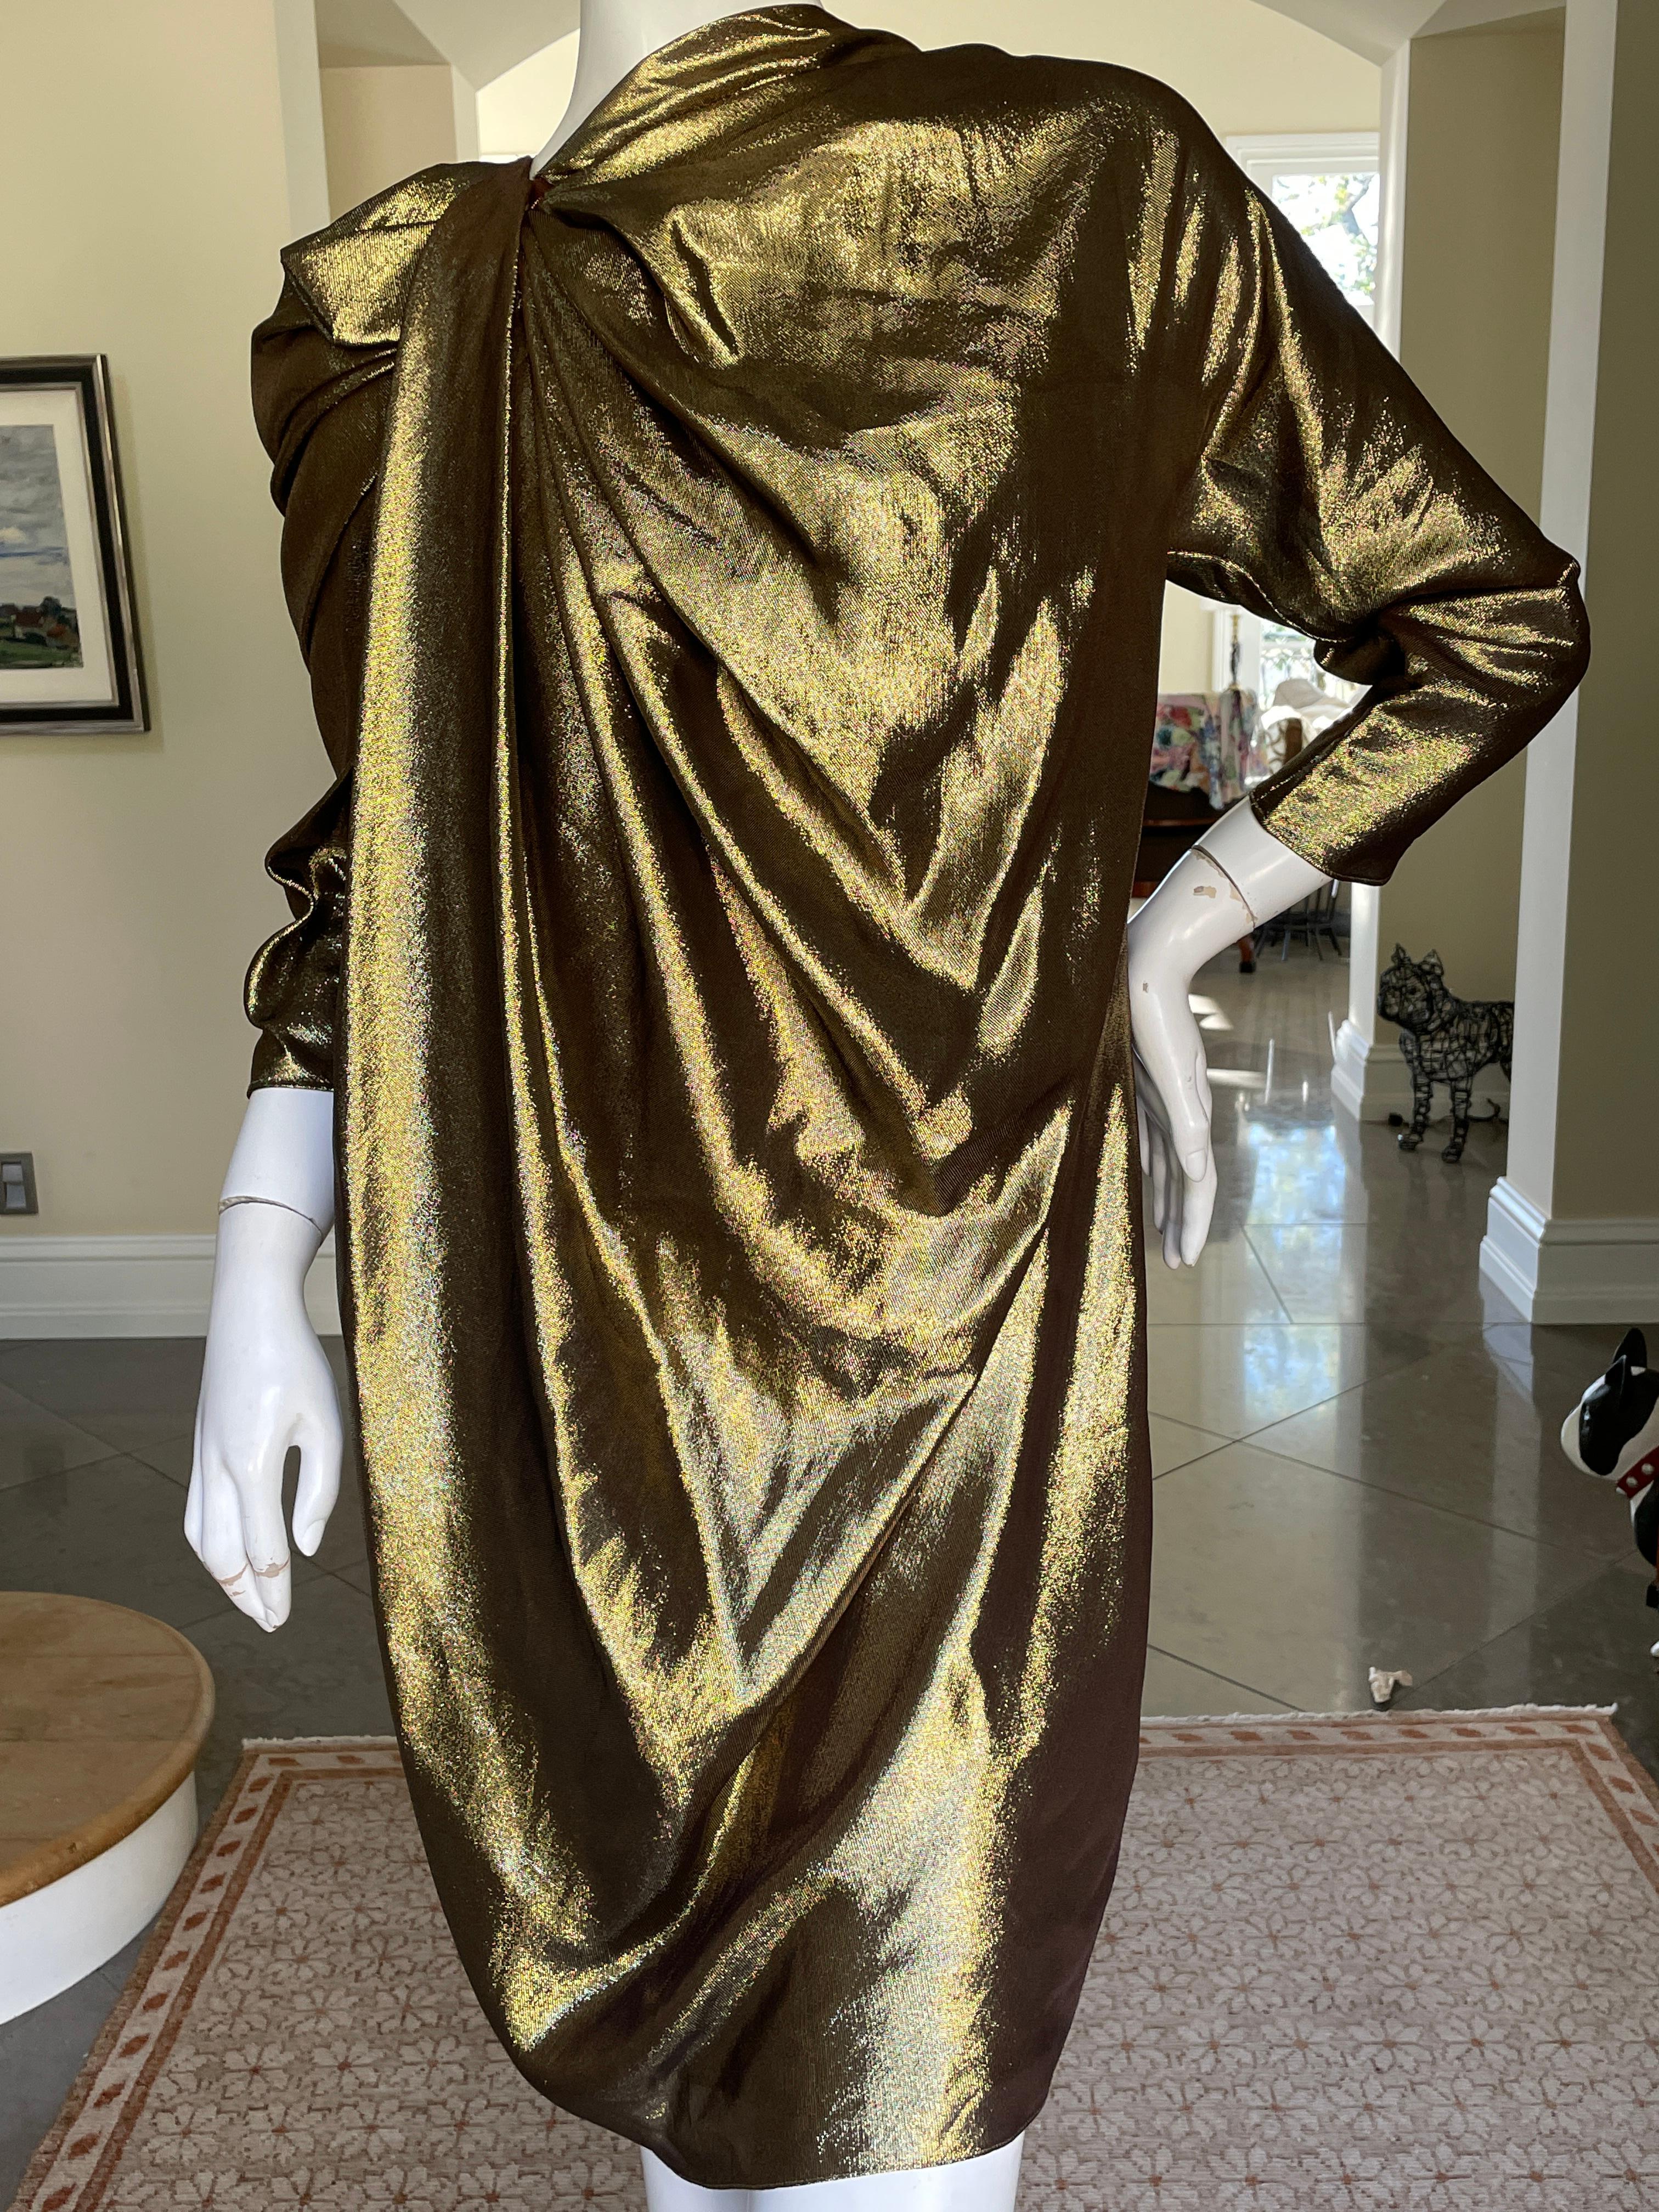 Lanvin by Alber Elbaz Metallic Gold Goddess Dress from Fall 2009
 So beautiful, much prettier in person.
This is exquisite.
Size 40
 Bust 38